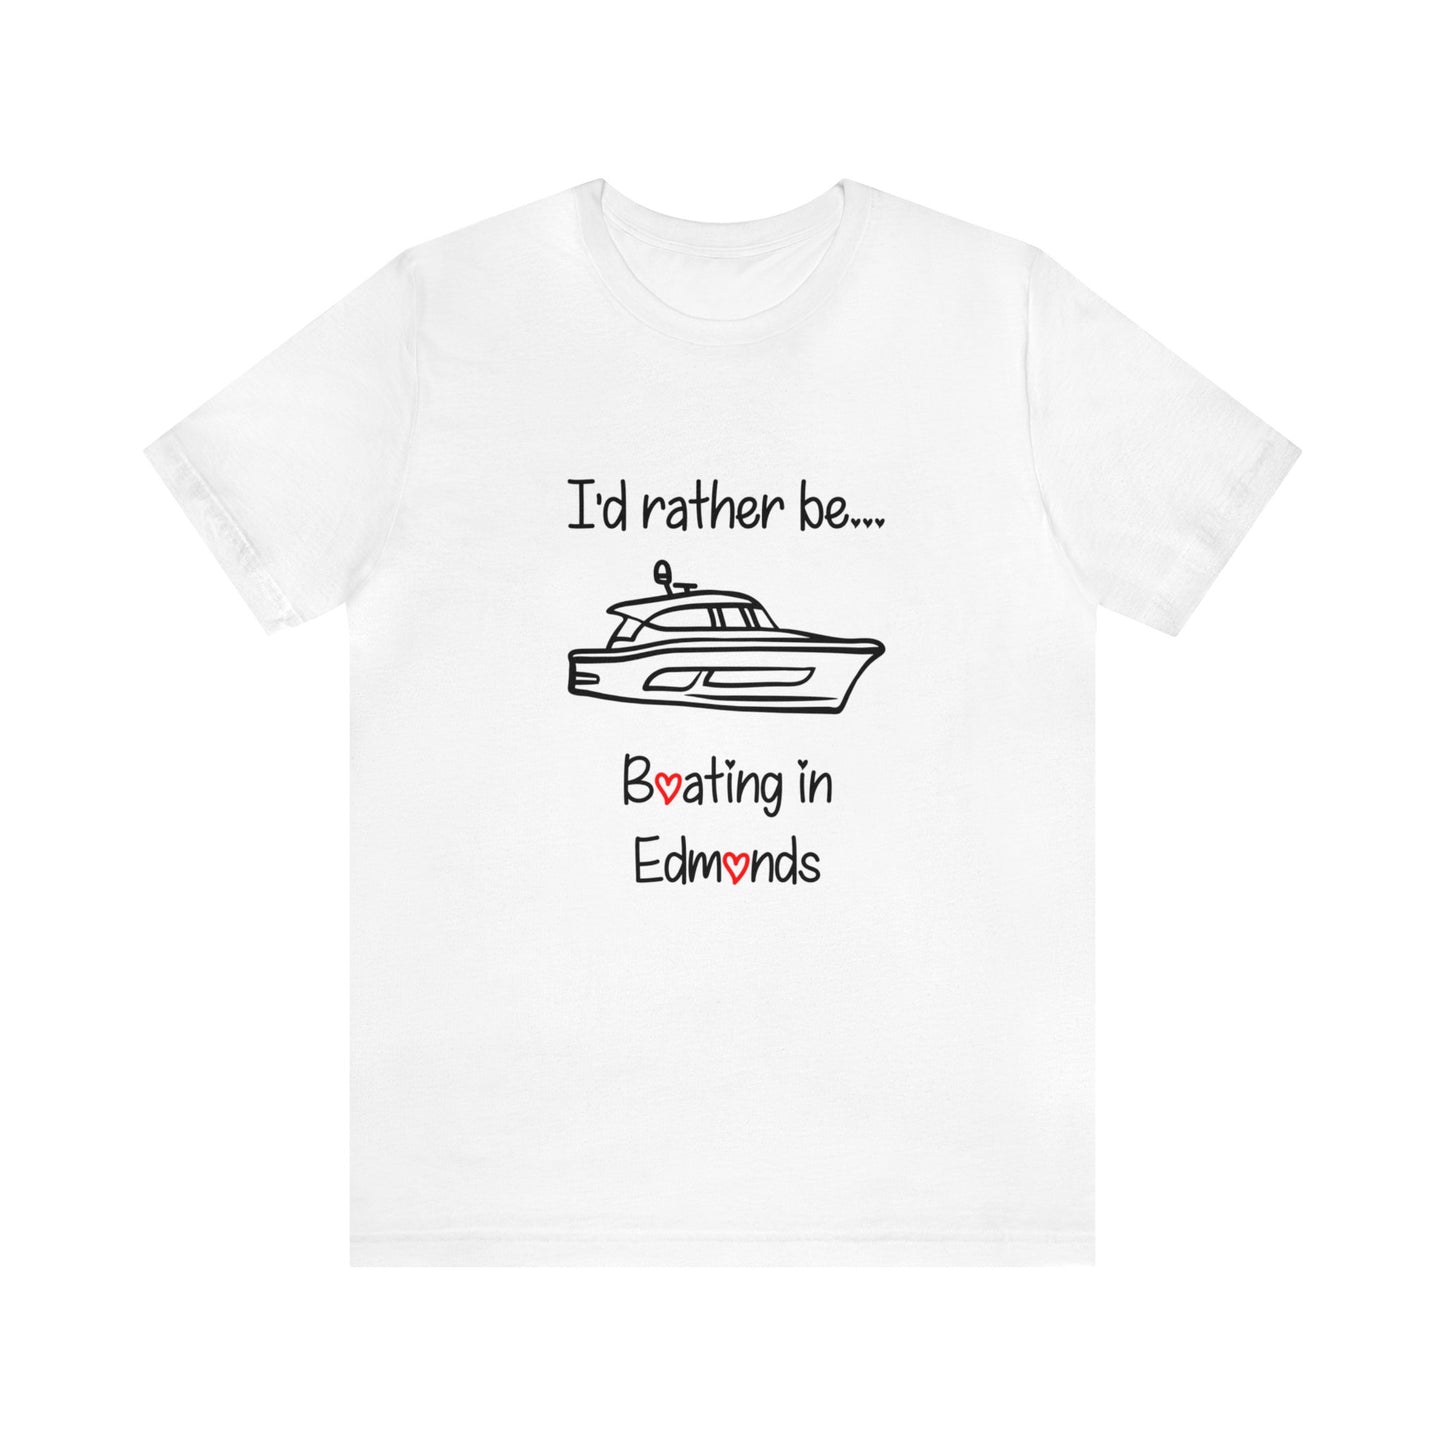 I'd rather be boating in Edmonds T-shirt